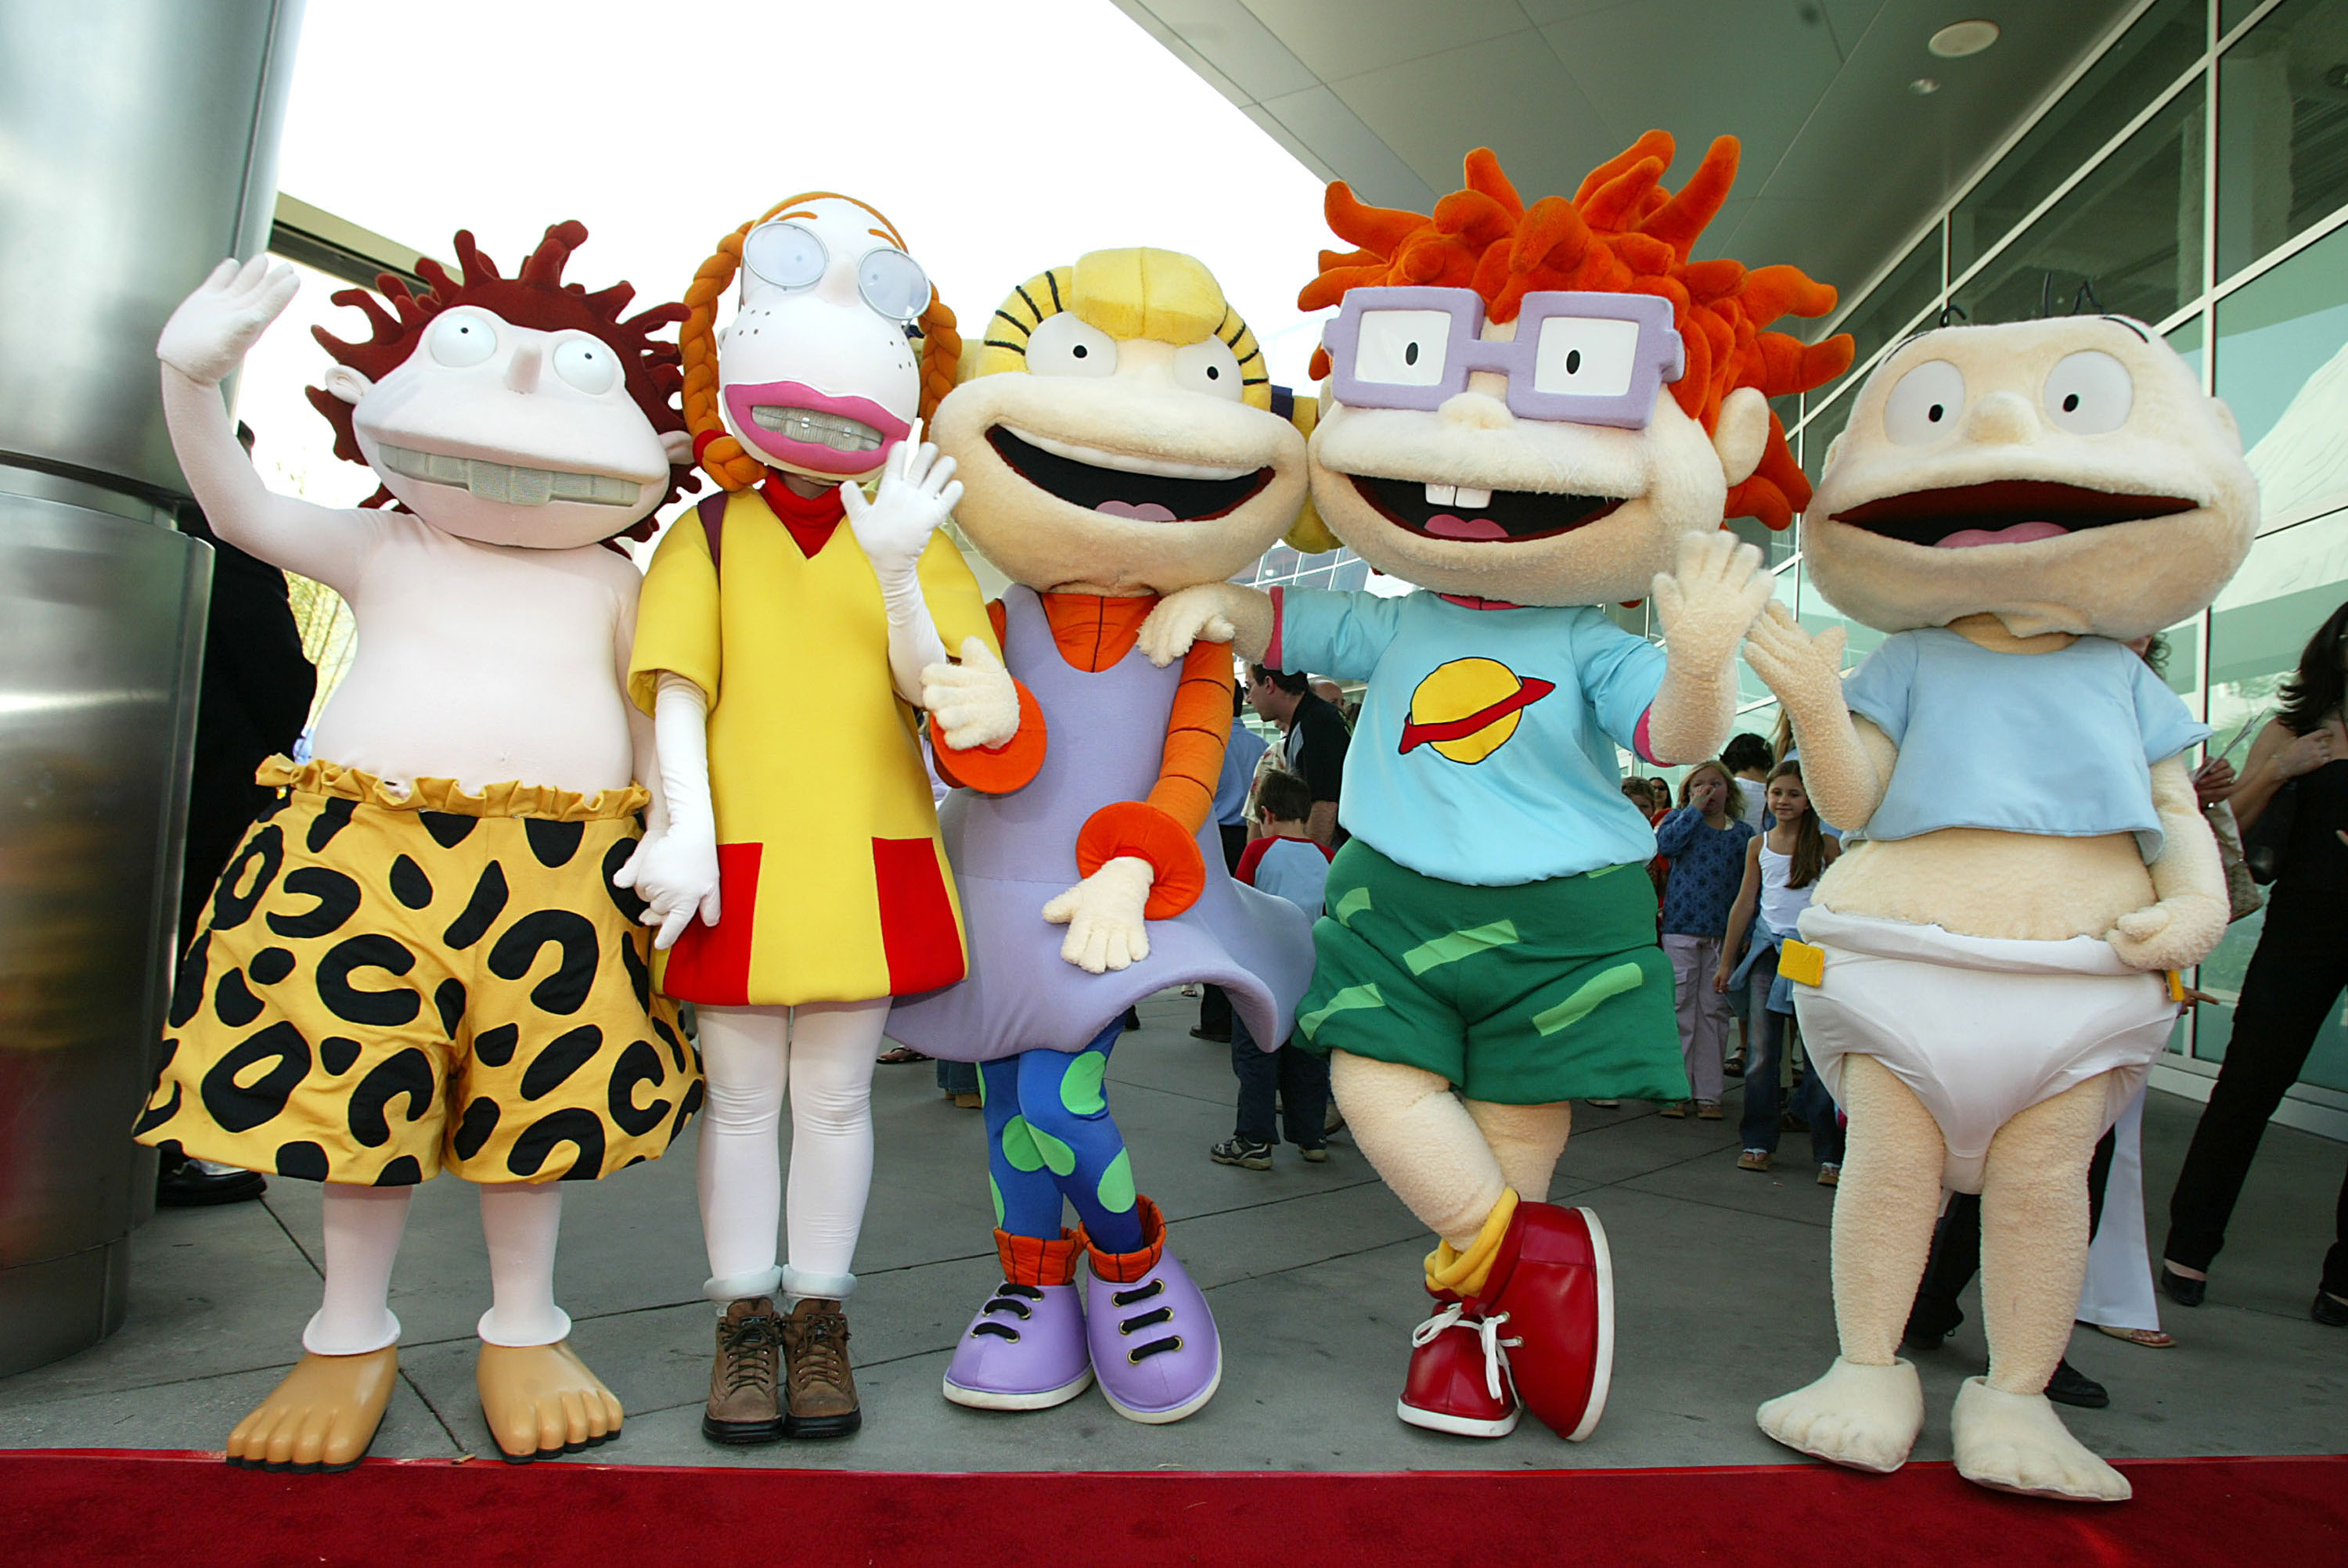 “Rugrats” Is Coming Back With Original Voice Cast In New Animated Series